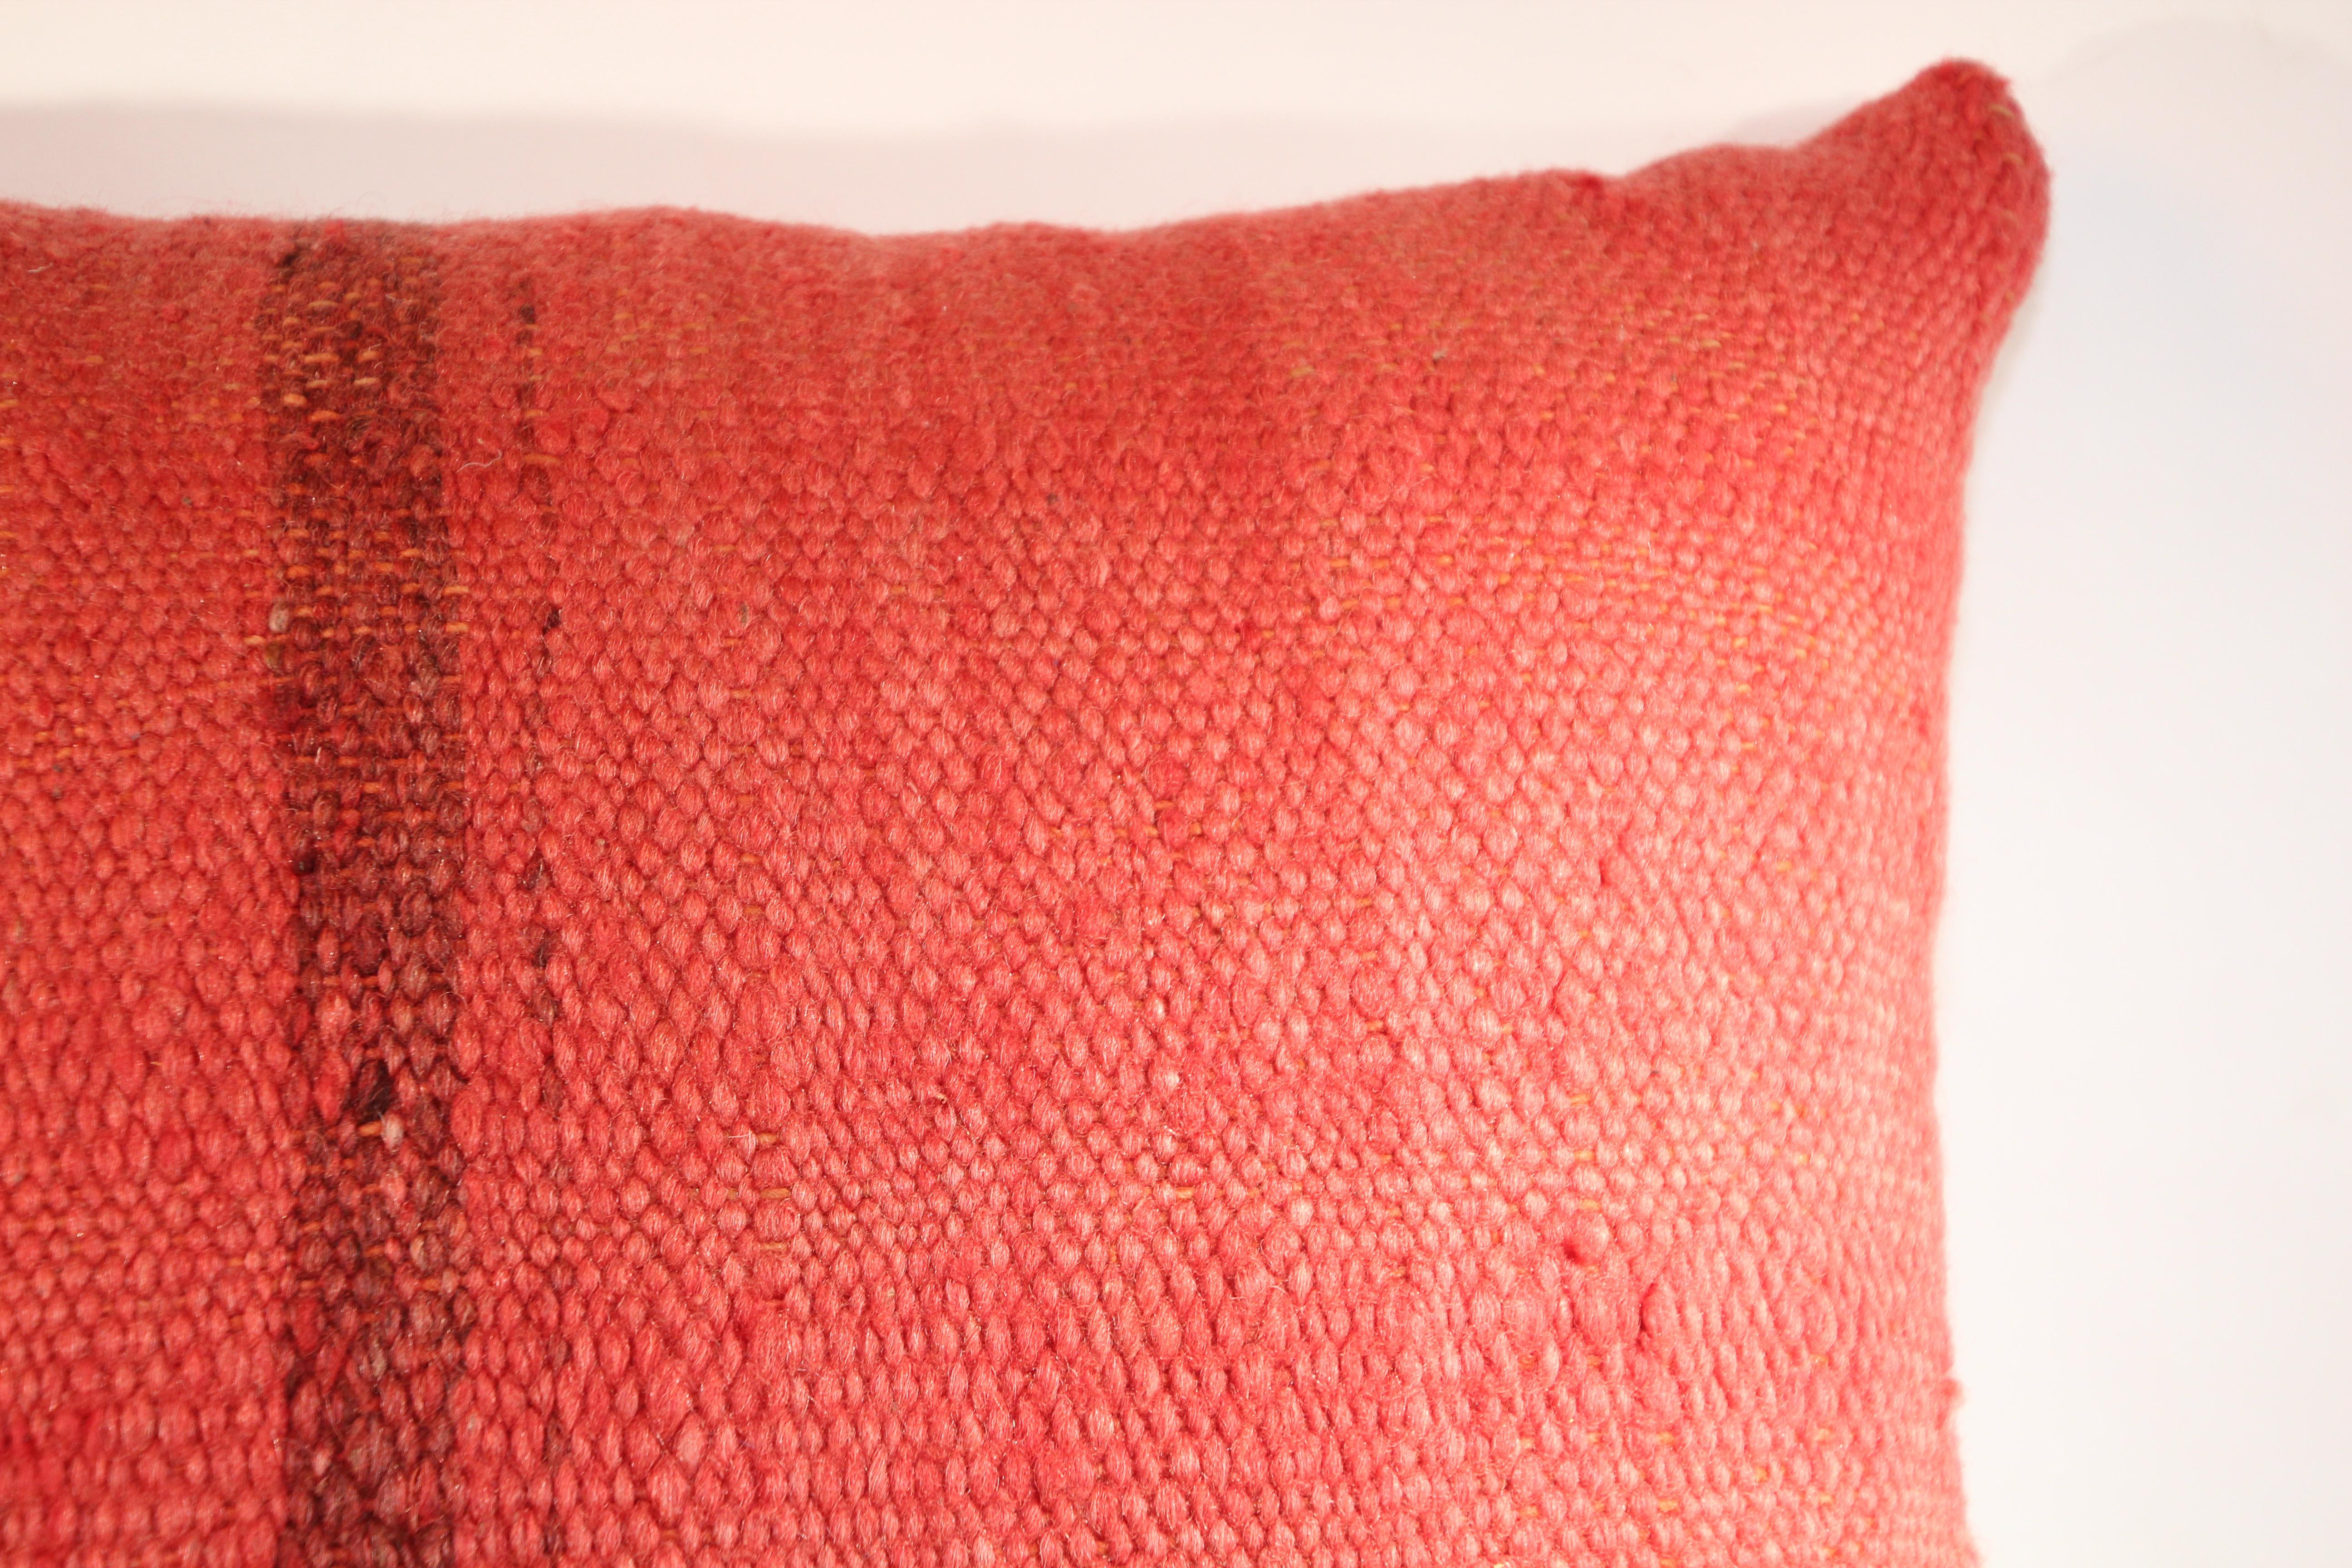 Hand-Crafted Vintage Red and Black Berber Moroccan Pillow